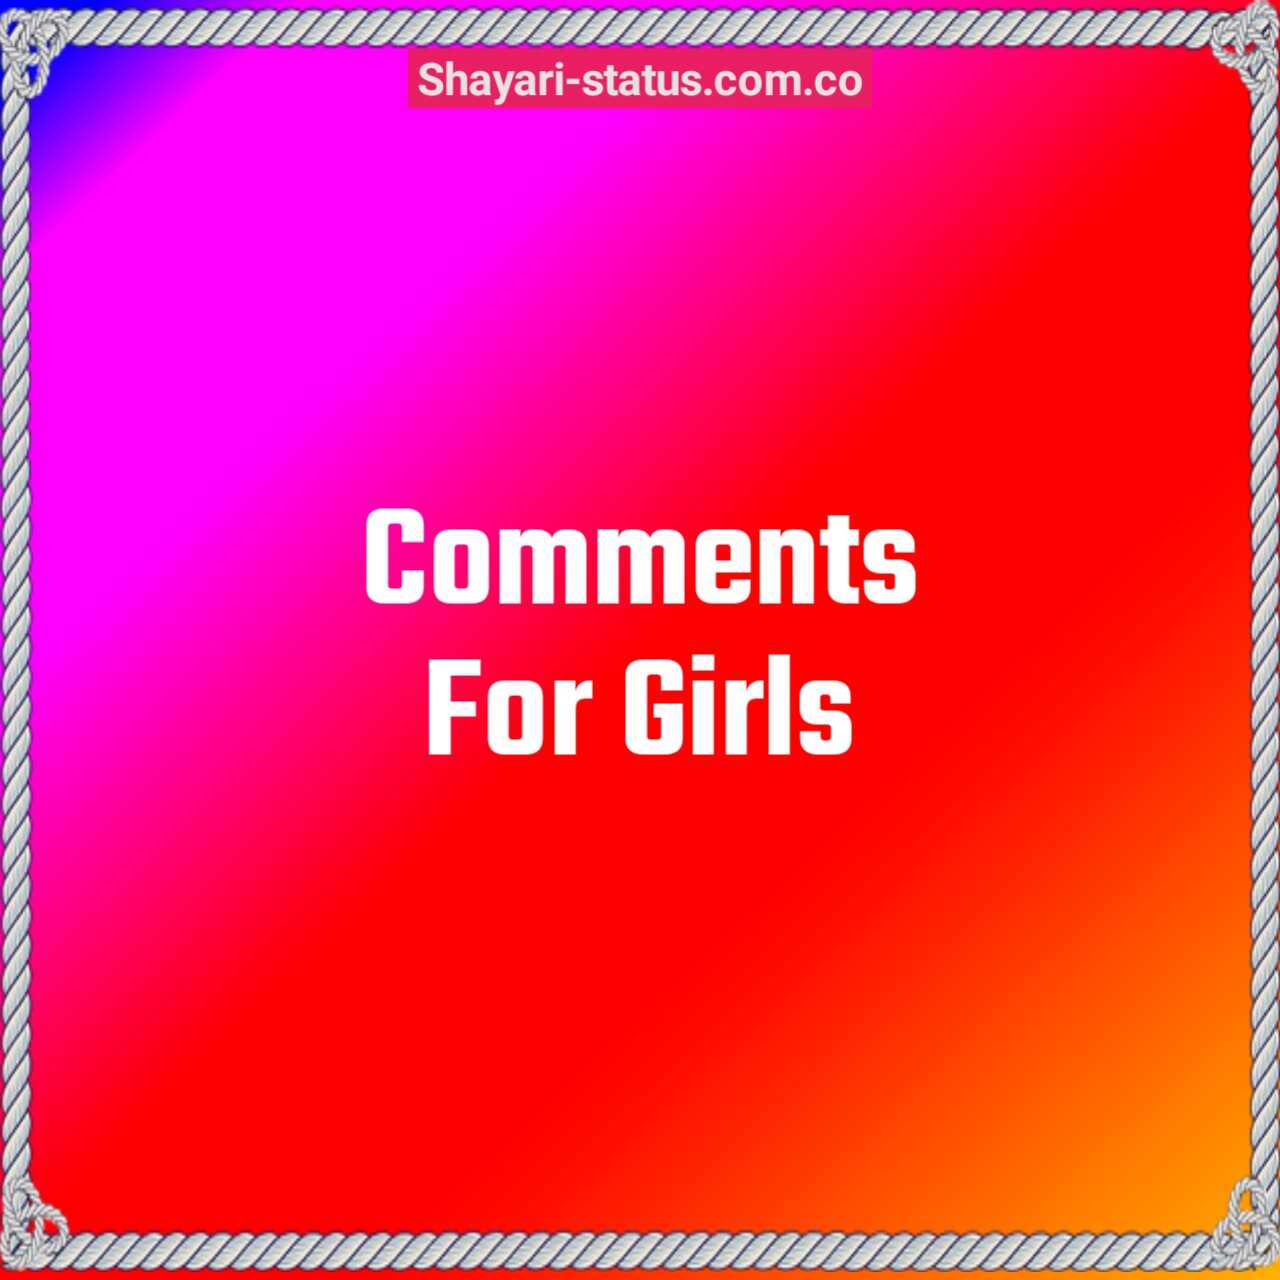 Comments For Girls